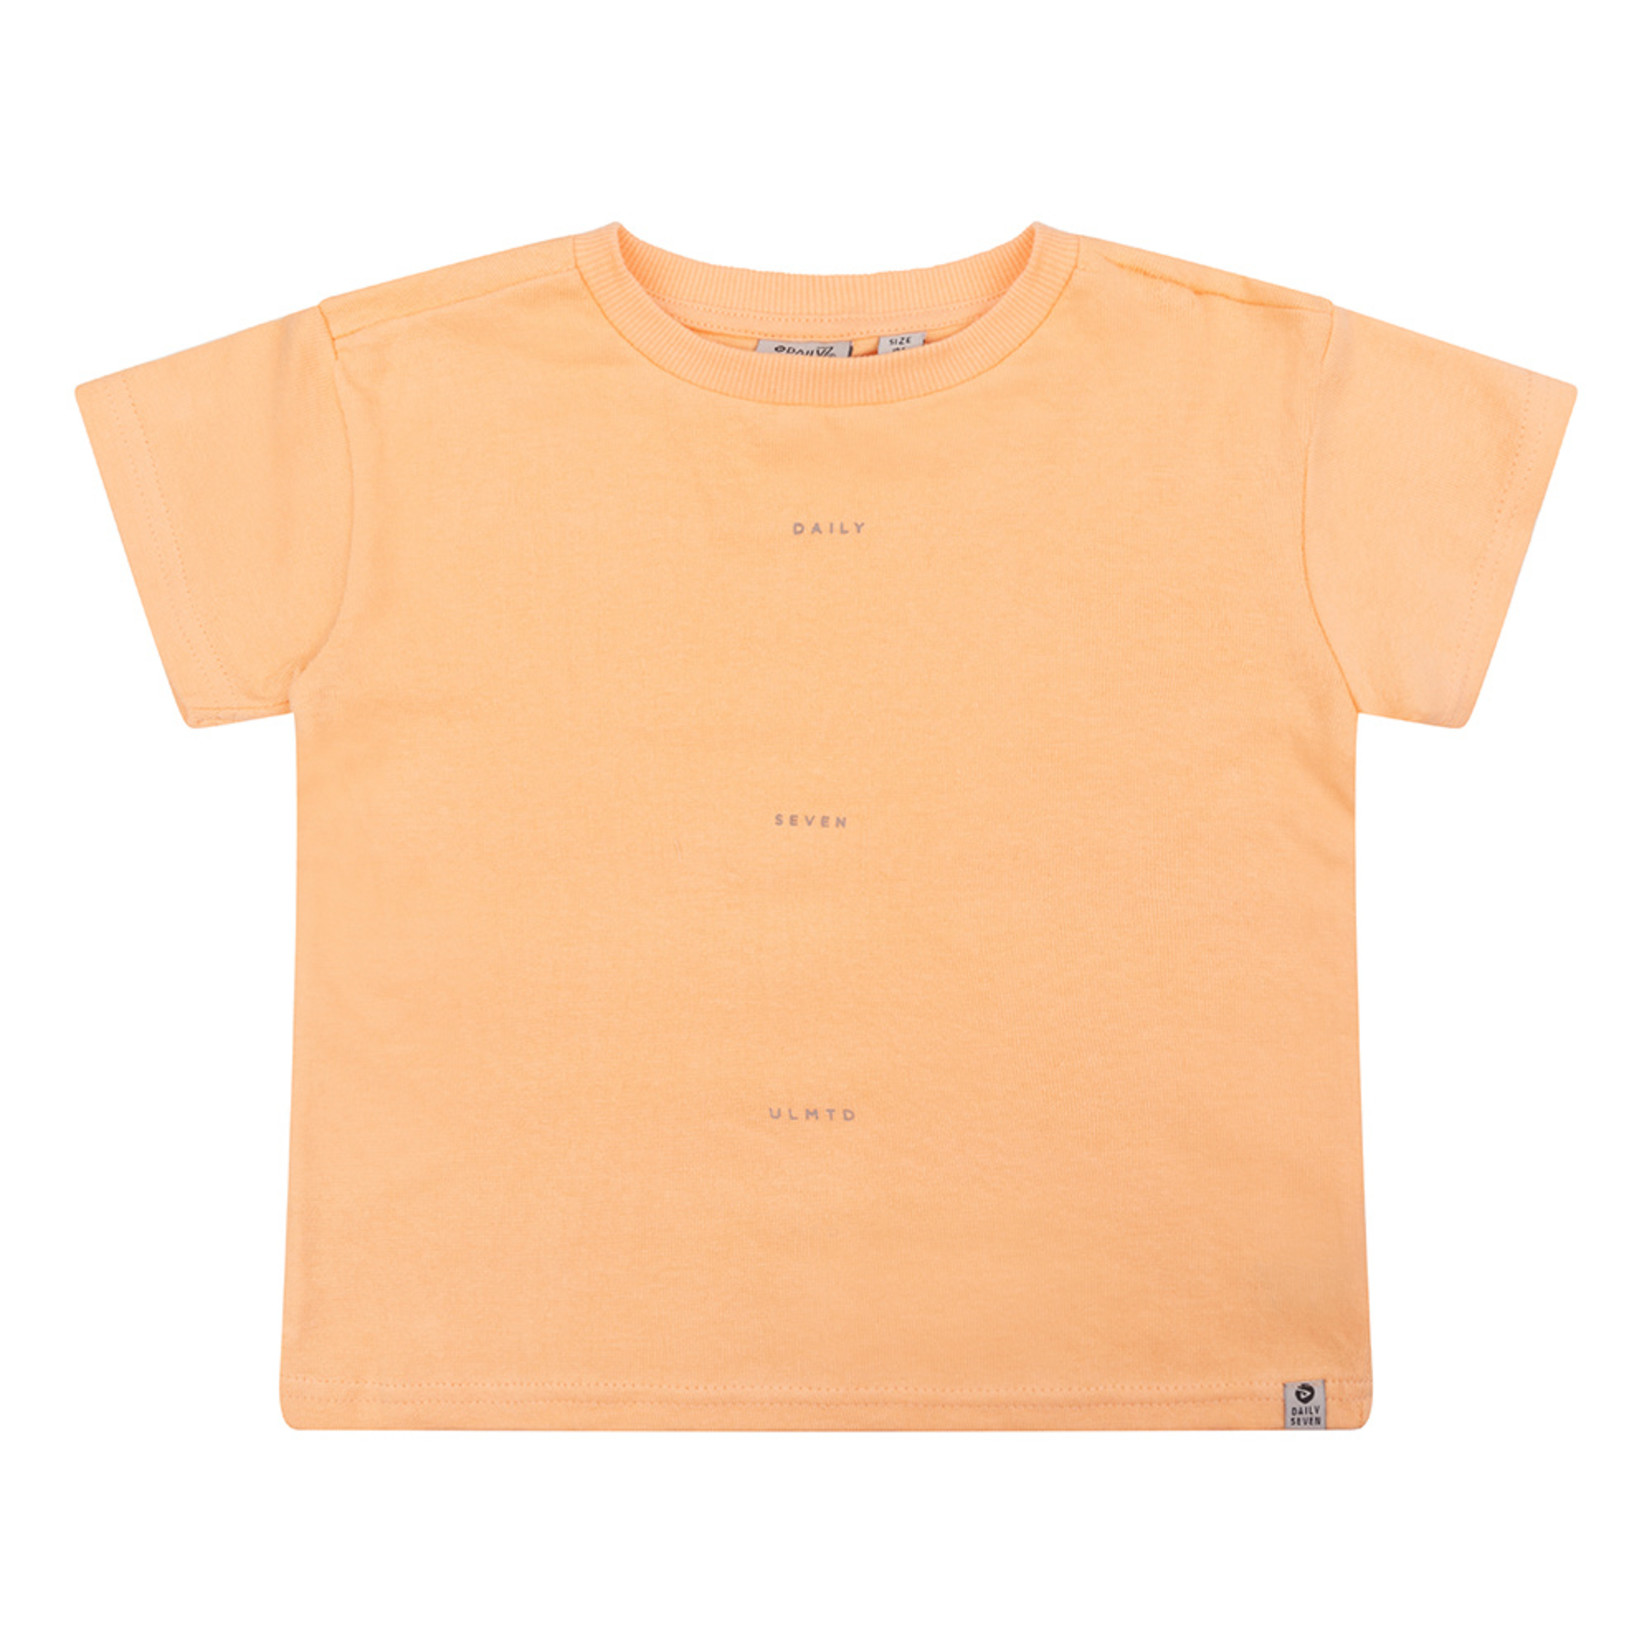 Daily7 T-shirt Daily7 Light Apricot